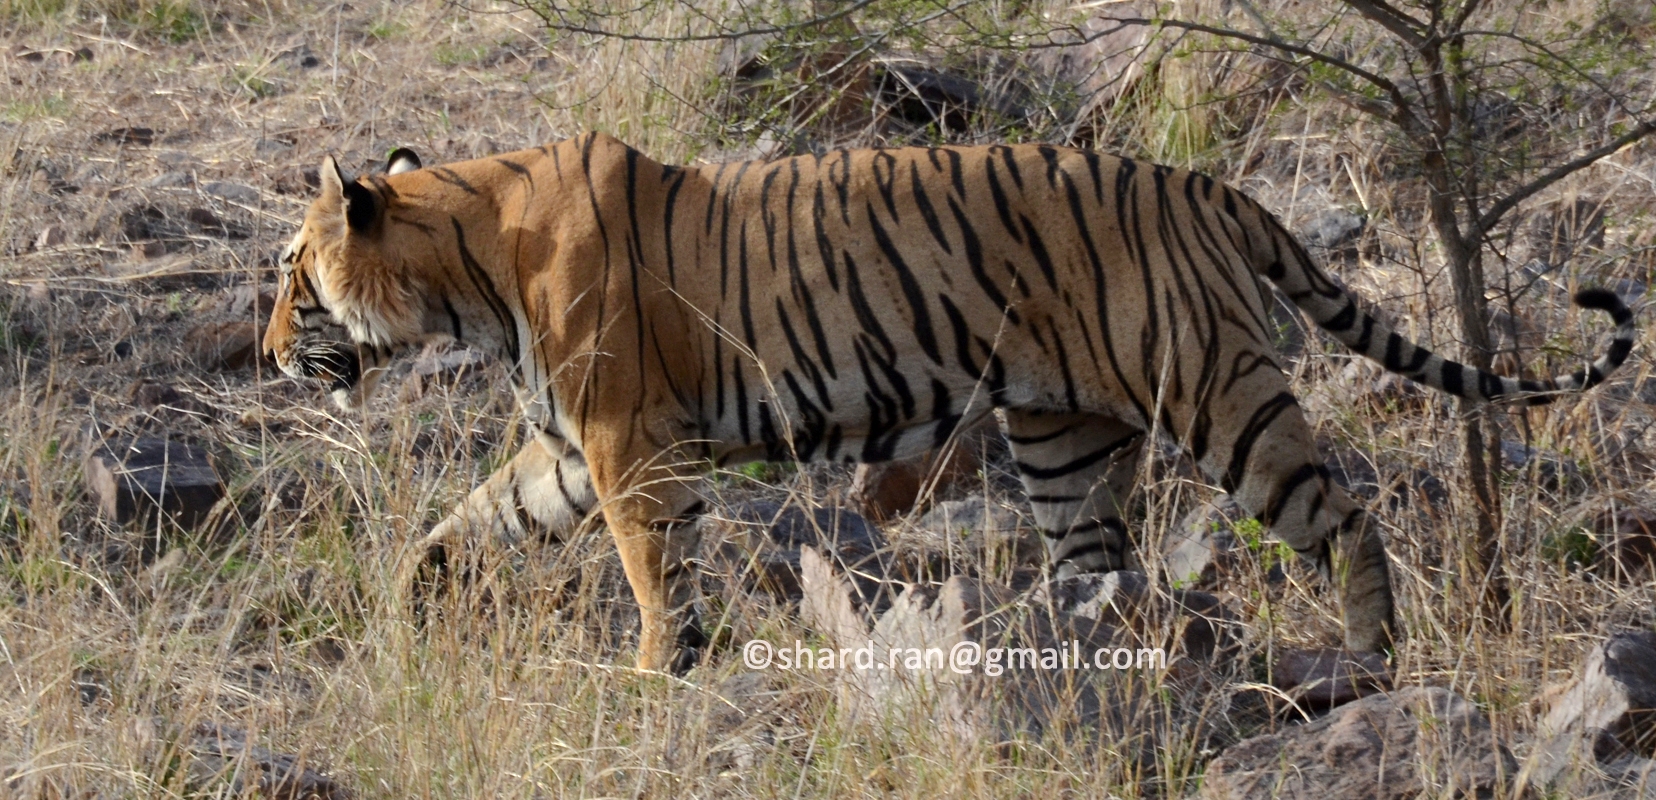 The tiger, Star male injured severely